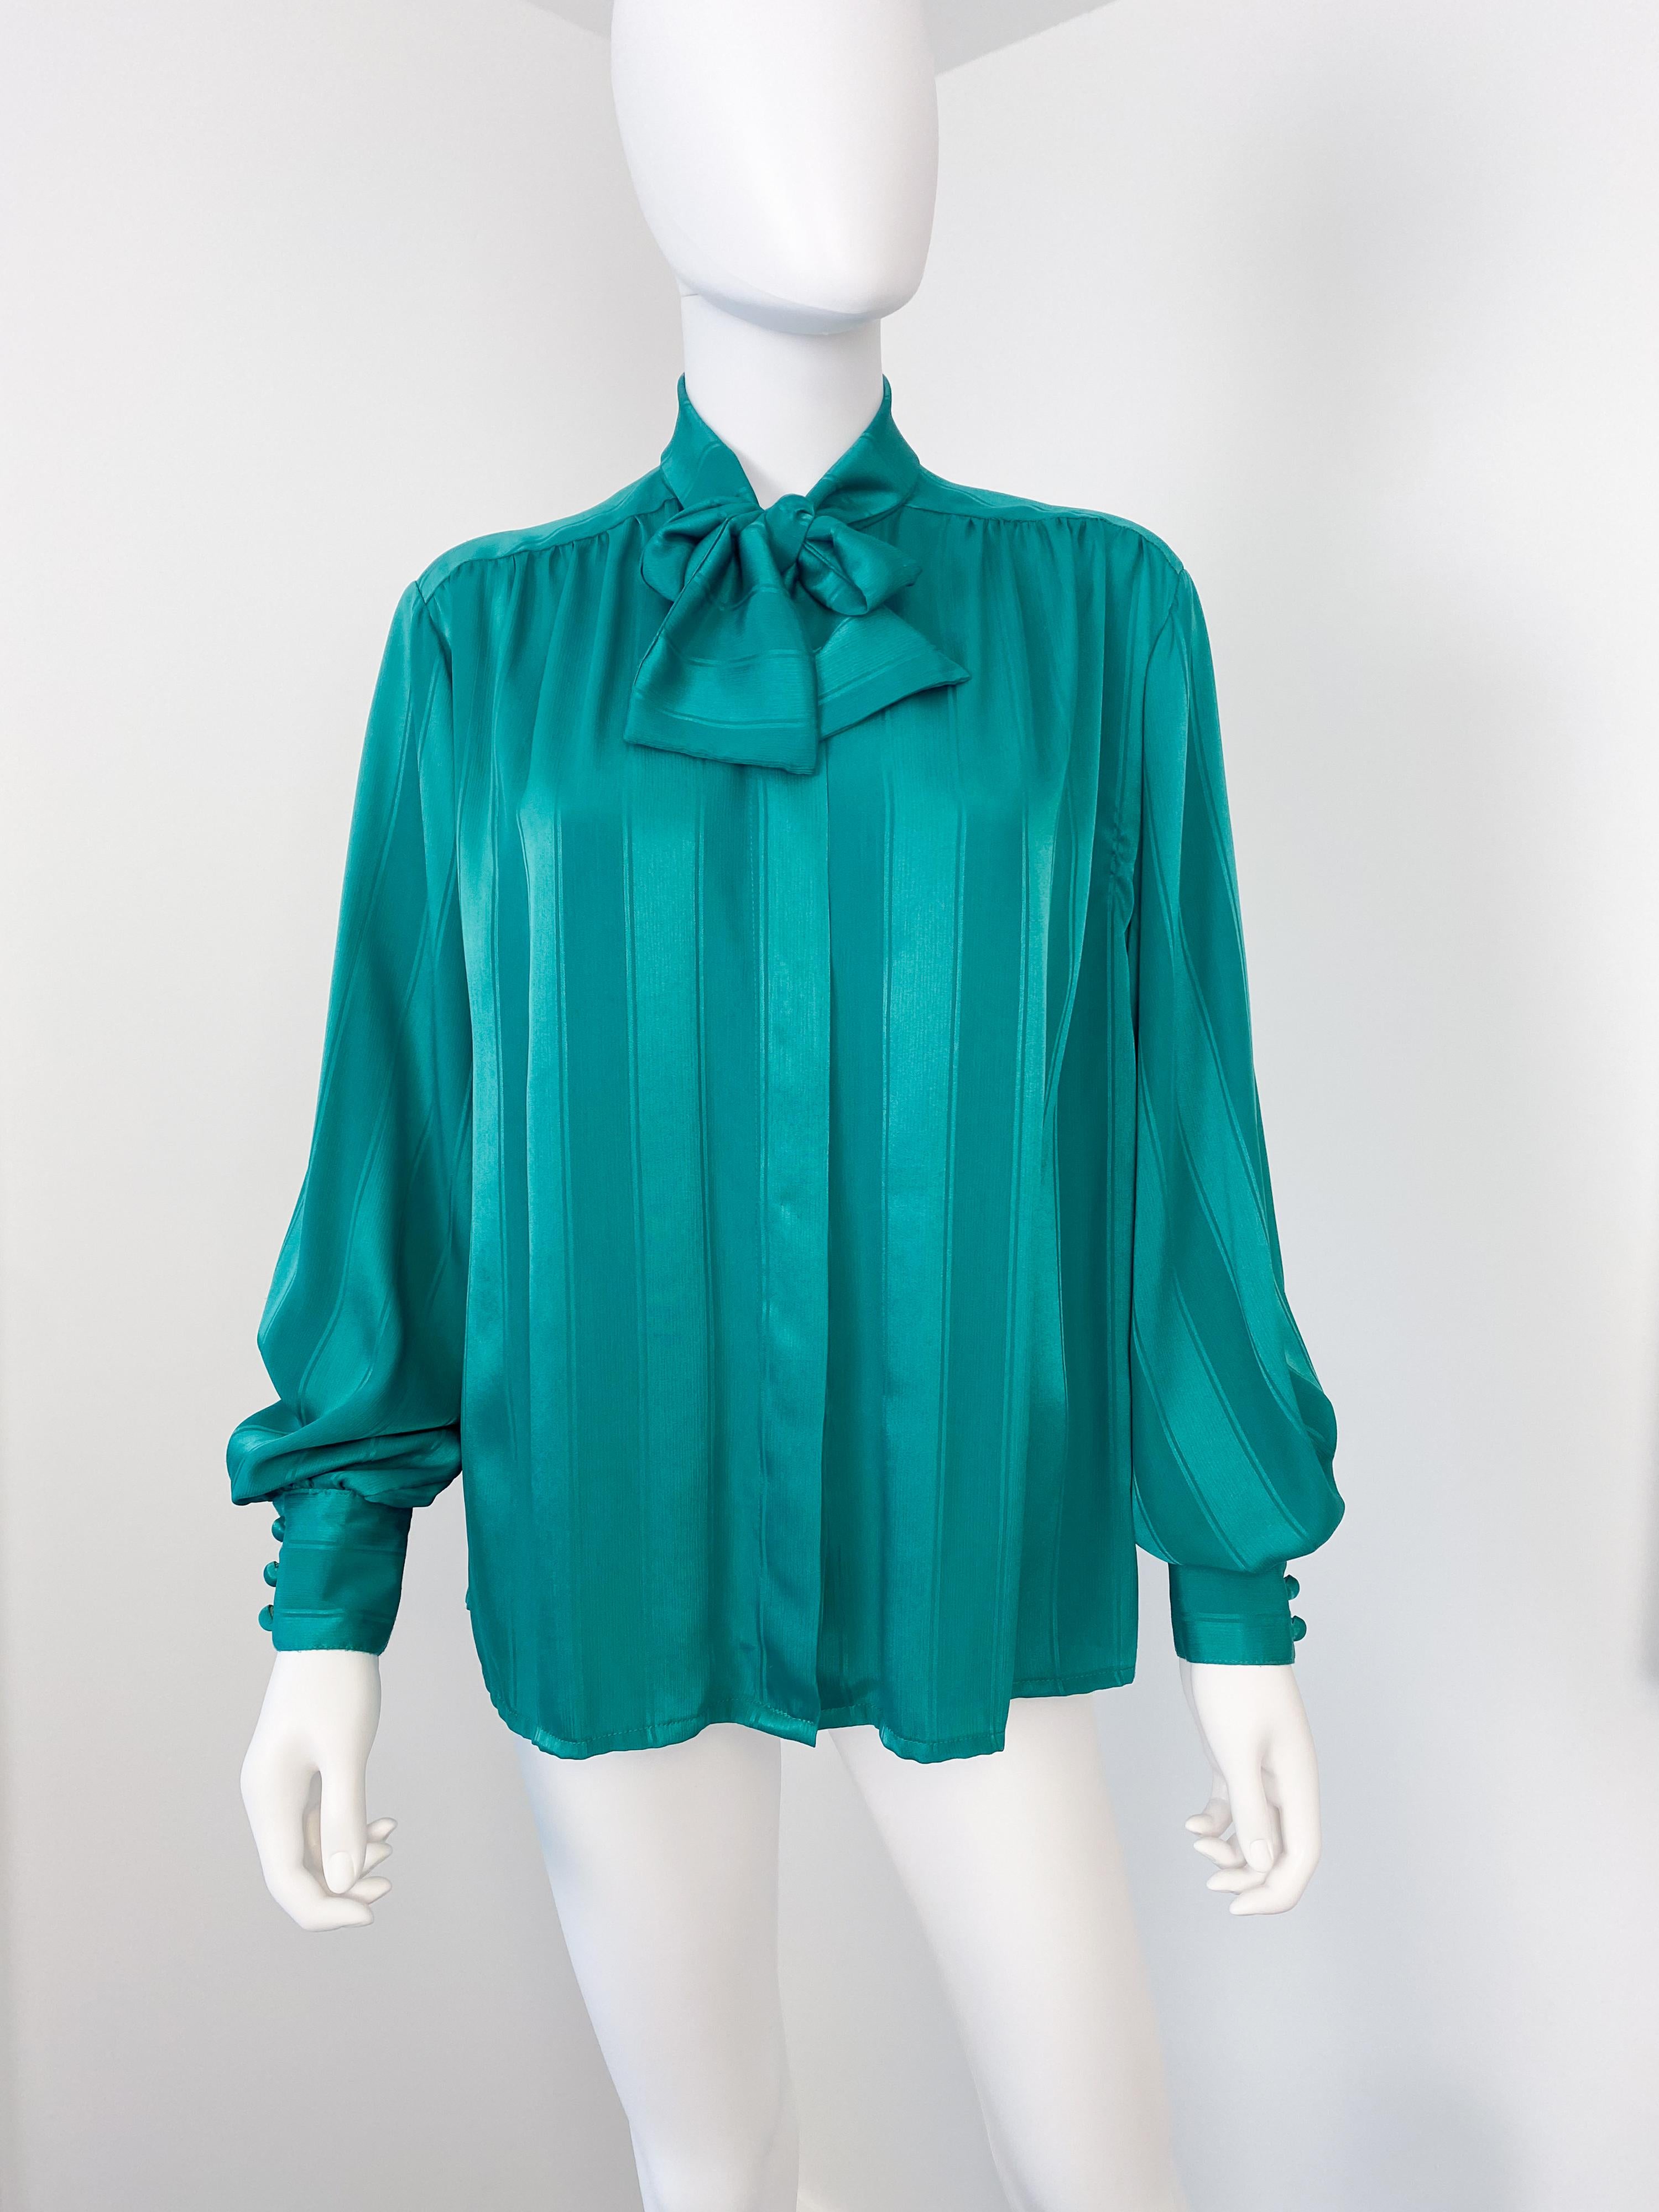 Wonderful vintage 1980s silky polyester pussy bow blouse with attached scarf-bow. Vibrant emerald green color fabric with tone-on-tone geometric striped pattern. There is ample pleating on the front, the back, and the button cuffs to provide